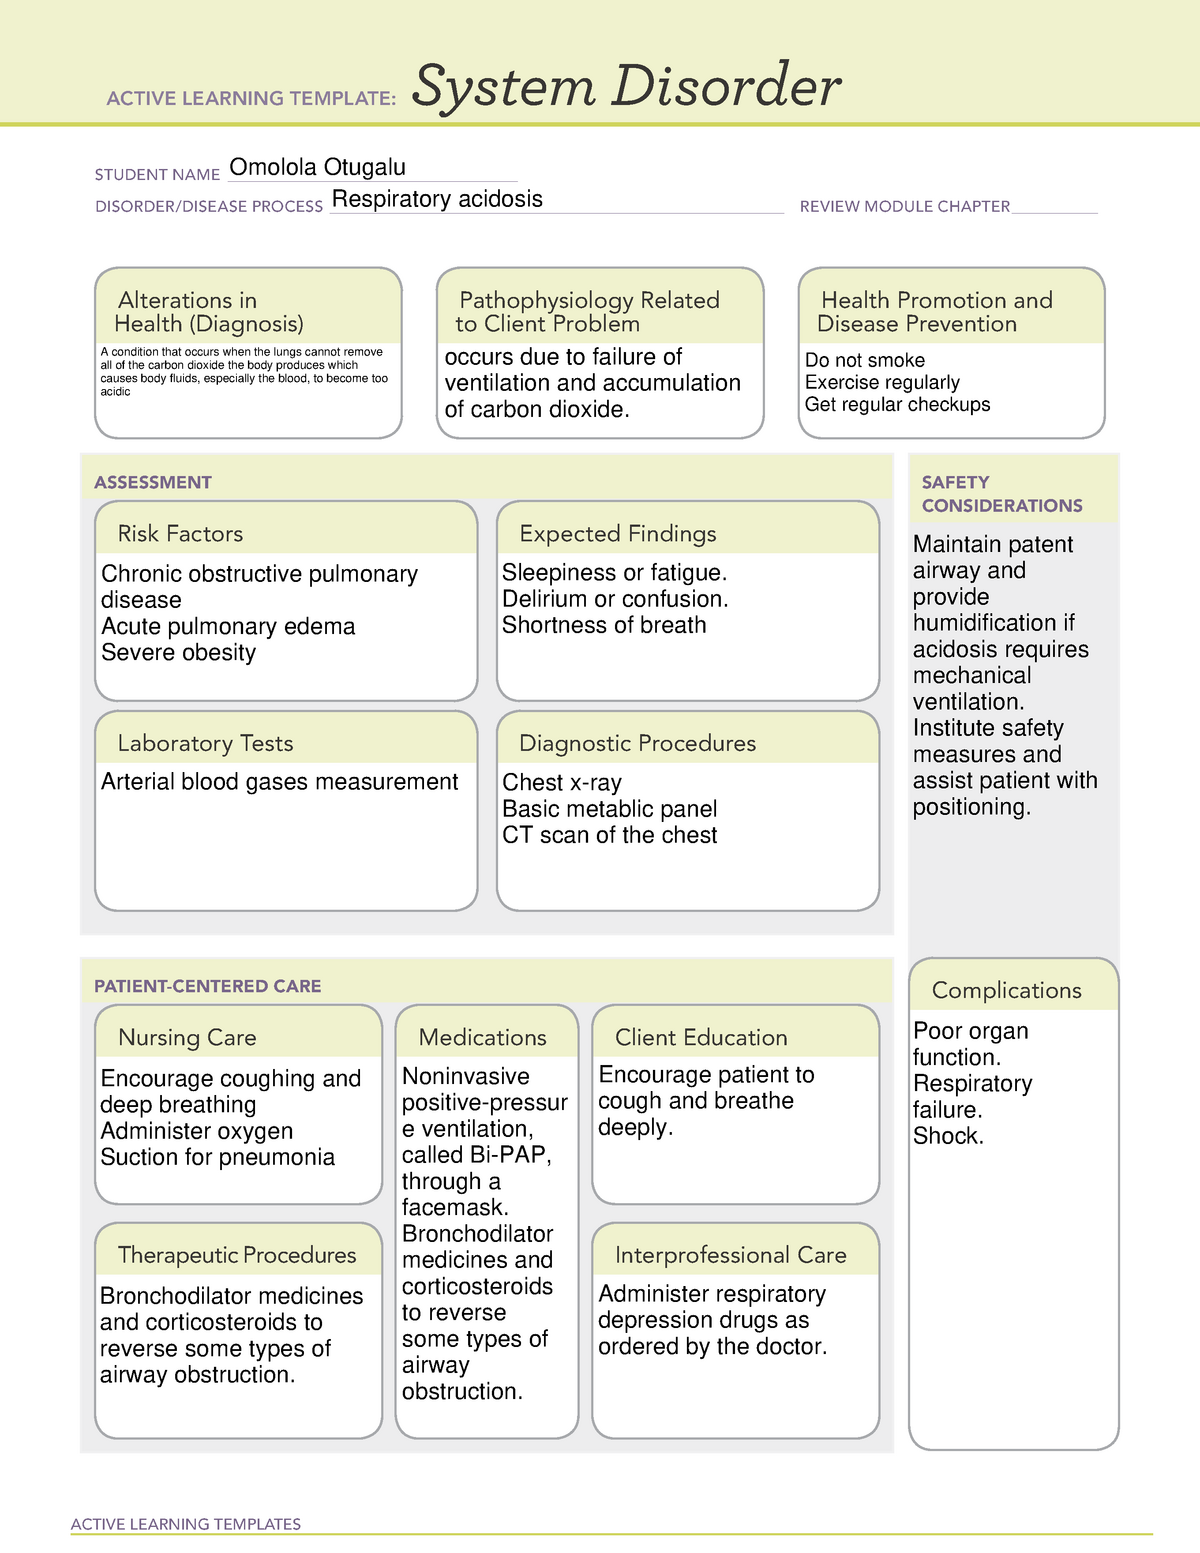 Respiratory acidosis - ACTIVE LEARNING TEMPLATES System Disorder ...